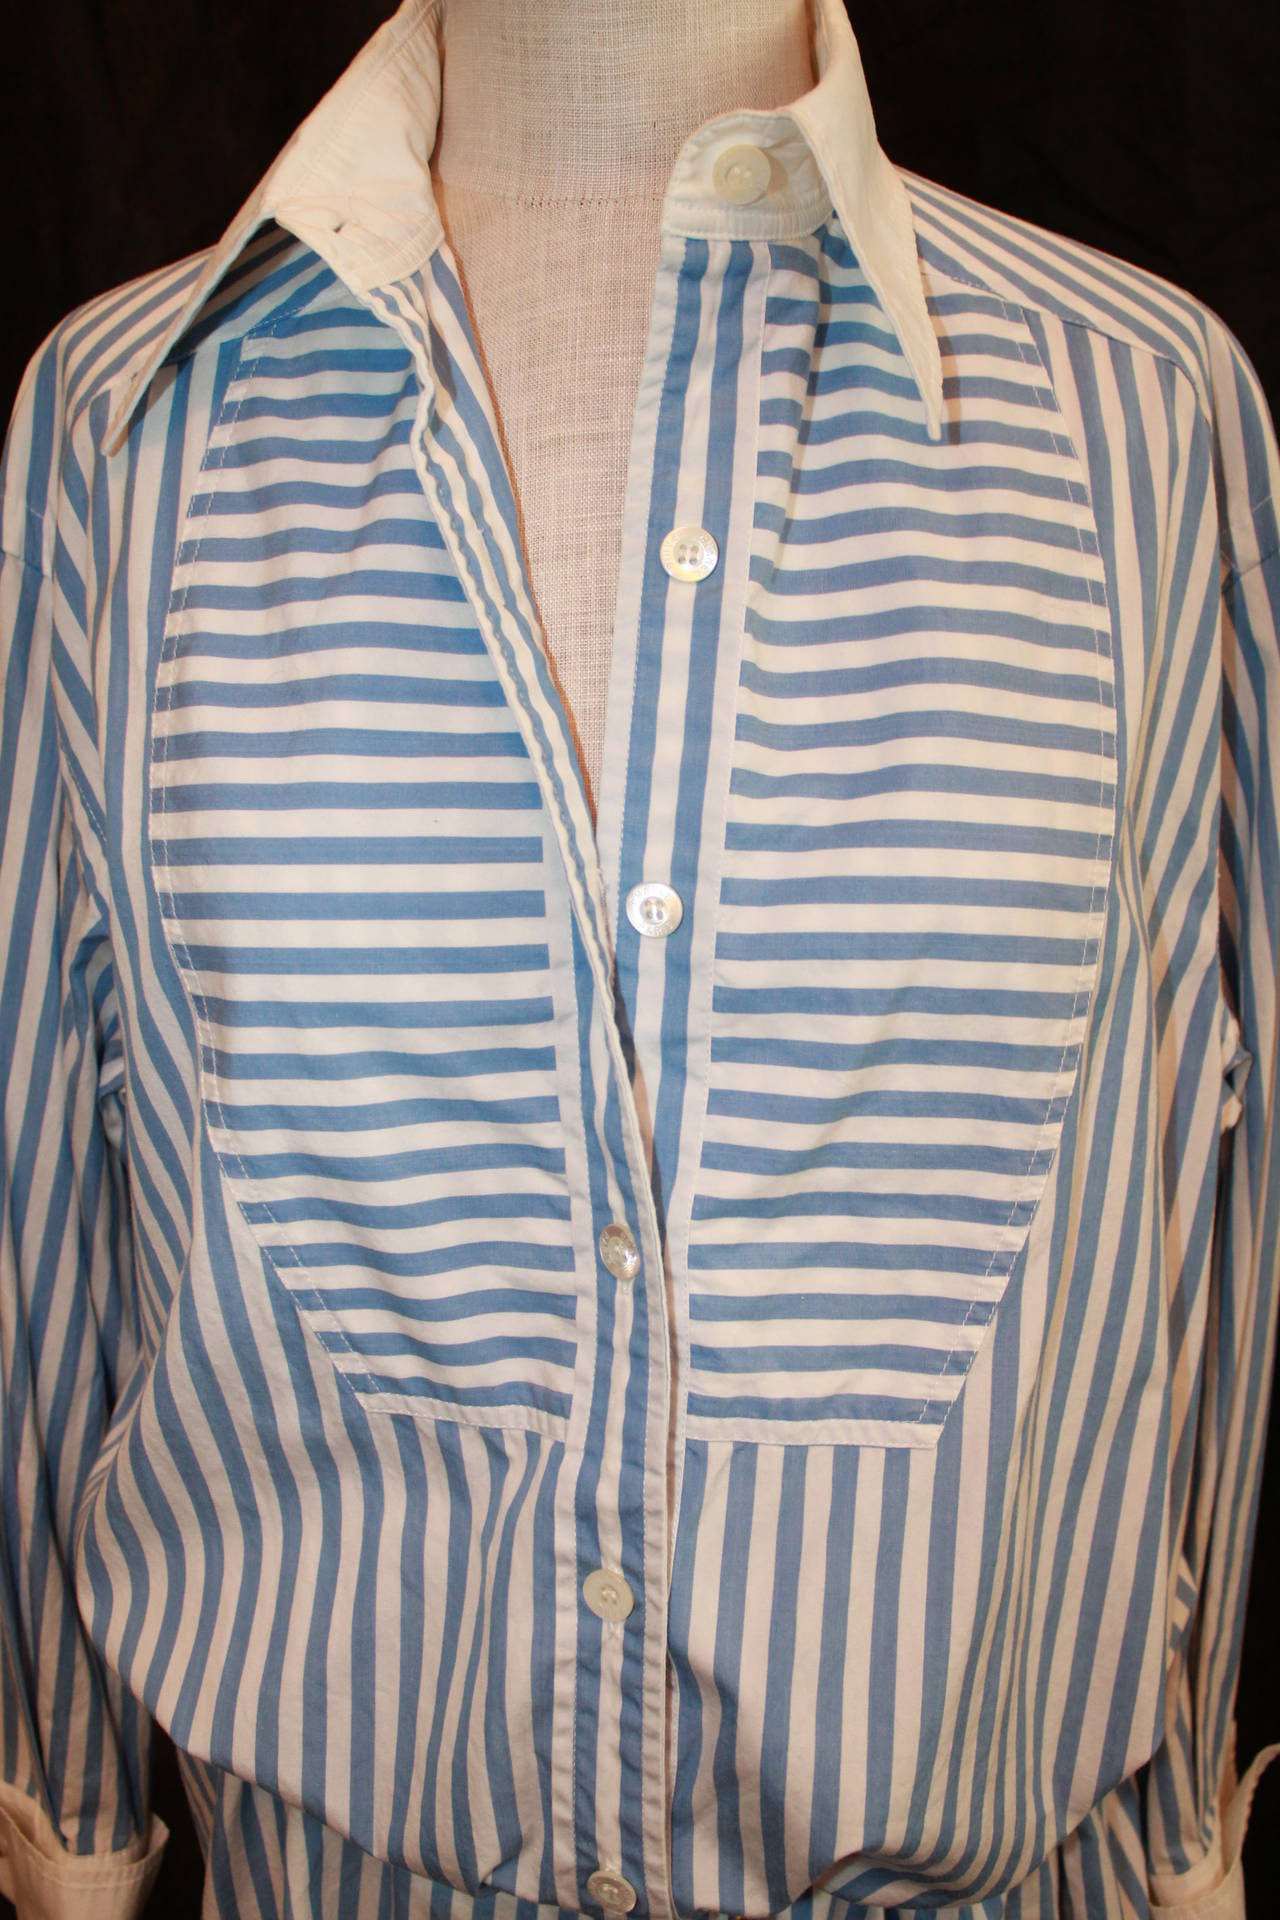 Chanel Sky Blue & White Striped Shirt Dress - L. This dress is in very good condition and is from the early 2000s. It is a large but can be worn by smaller sizes because of the fit. Belt is not included with the dress. 

Measurements:
Sleeve